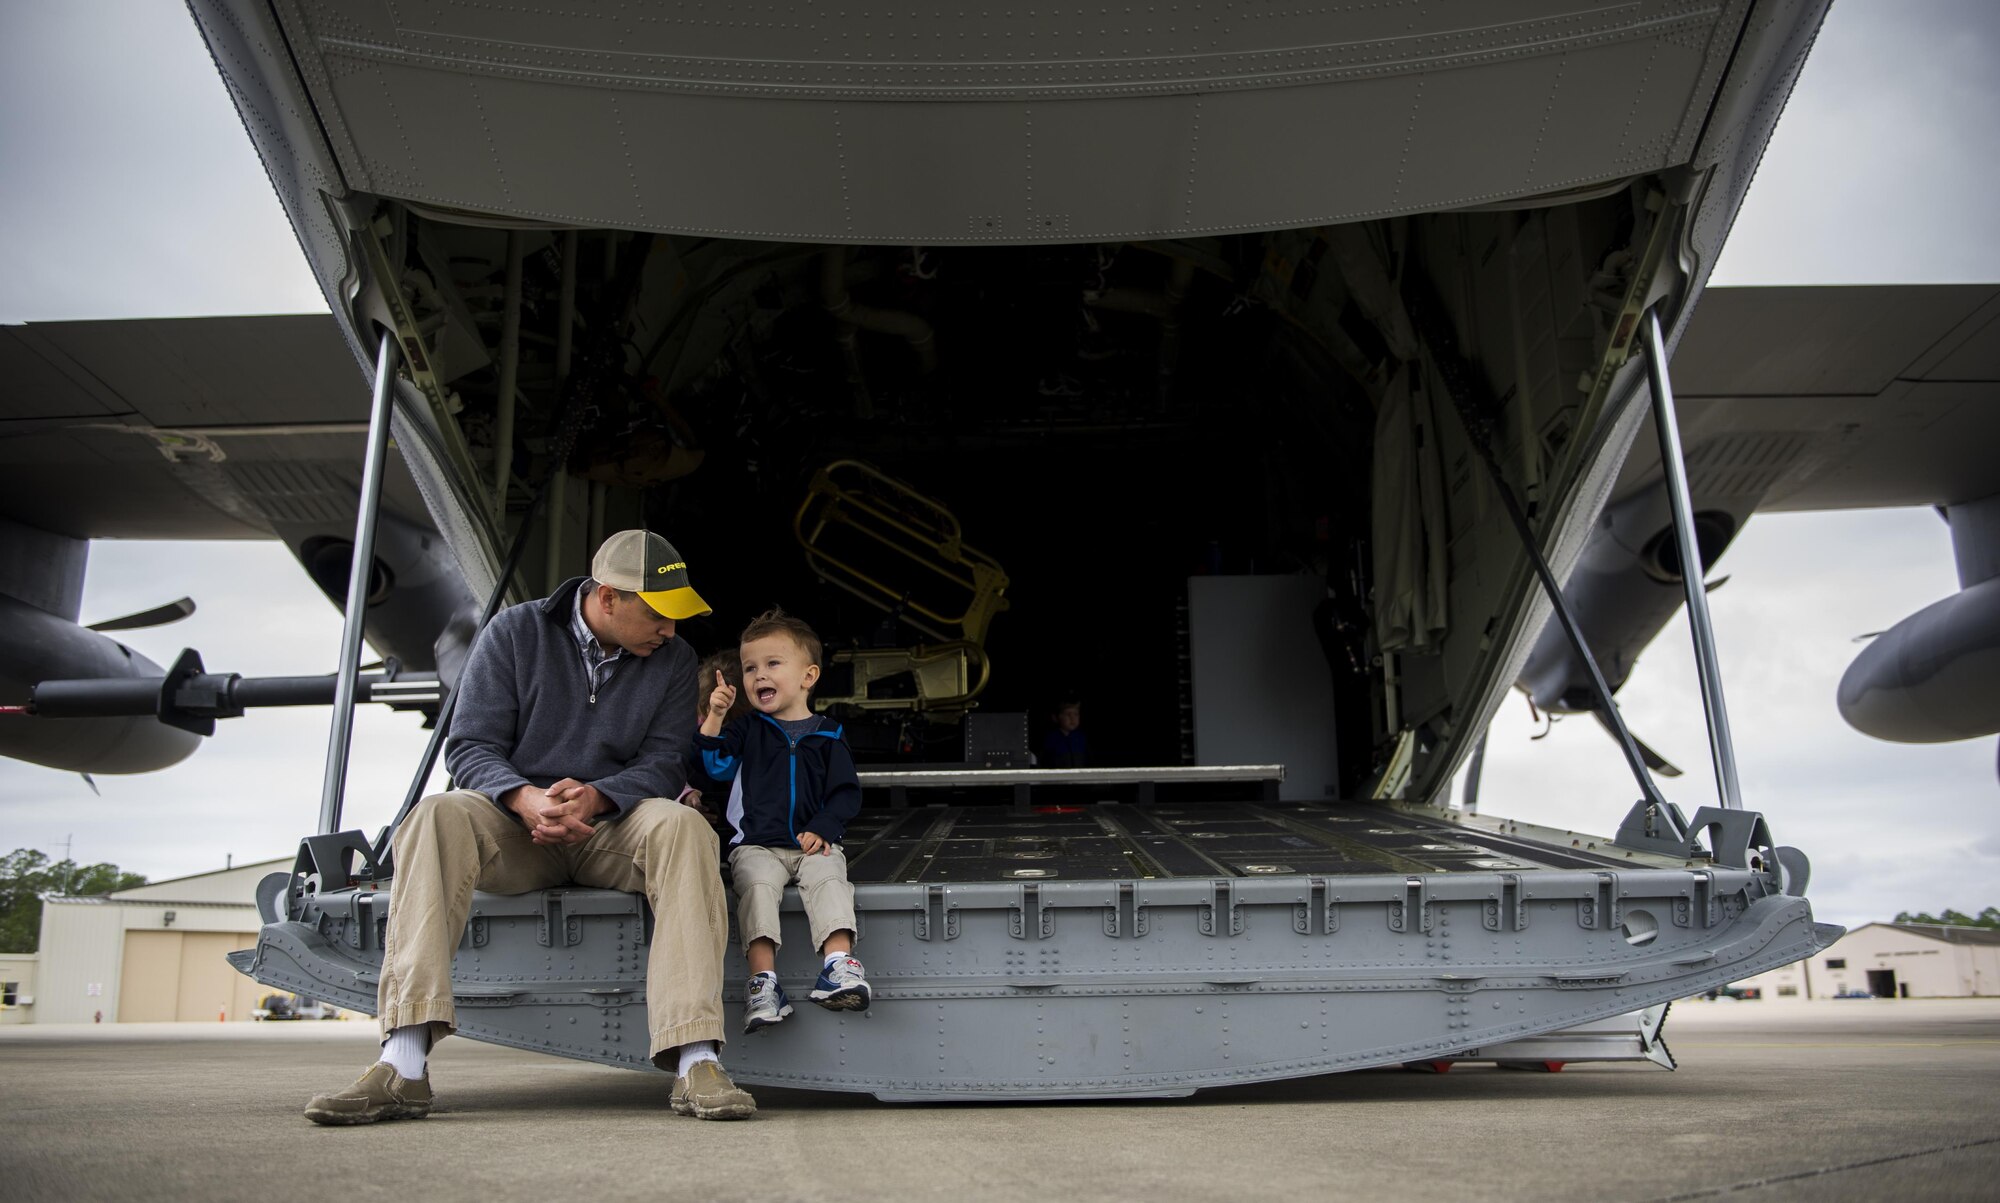 An Air Commando and his son sit on the back of an AC-130J Ghostrider gunship during a Spouses Flight tour at Hurlburt Field, Fla., Nov. 19, 2016. Before the flights began, spouse’s toured static displays of different aircraft to get a firsthand look at capabilities of the1st Special Operations Wing. (U.S. Air Force photo by Airman 1st Class Isaac O. Guest IV)